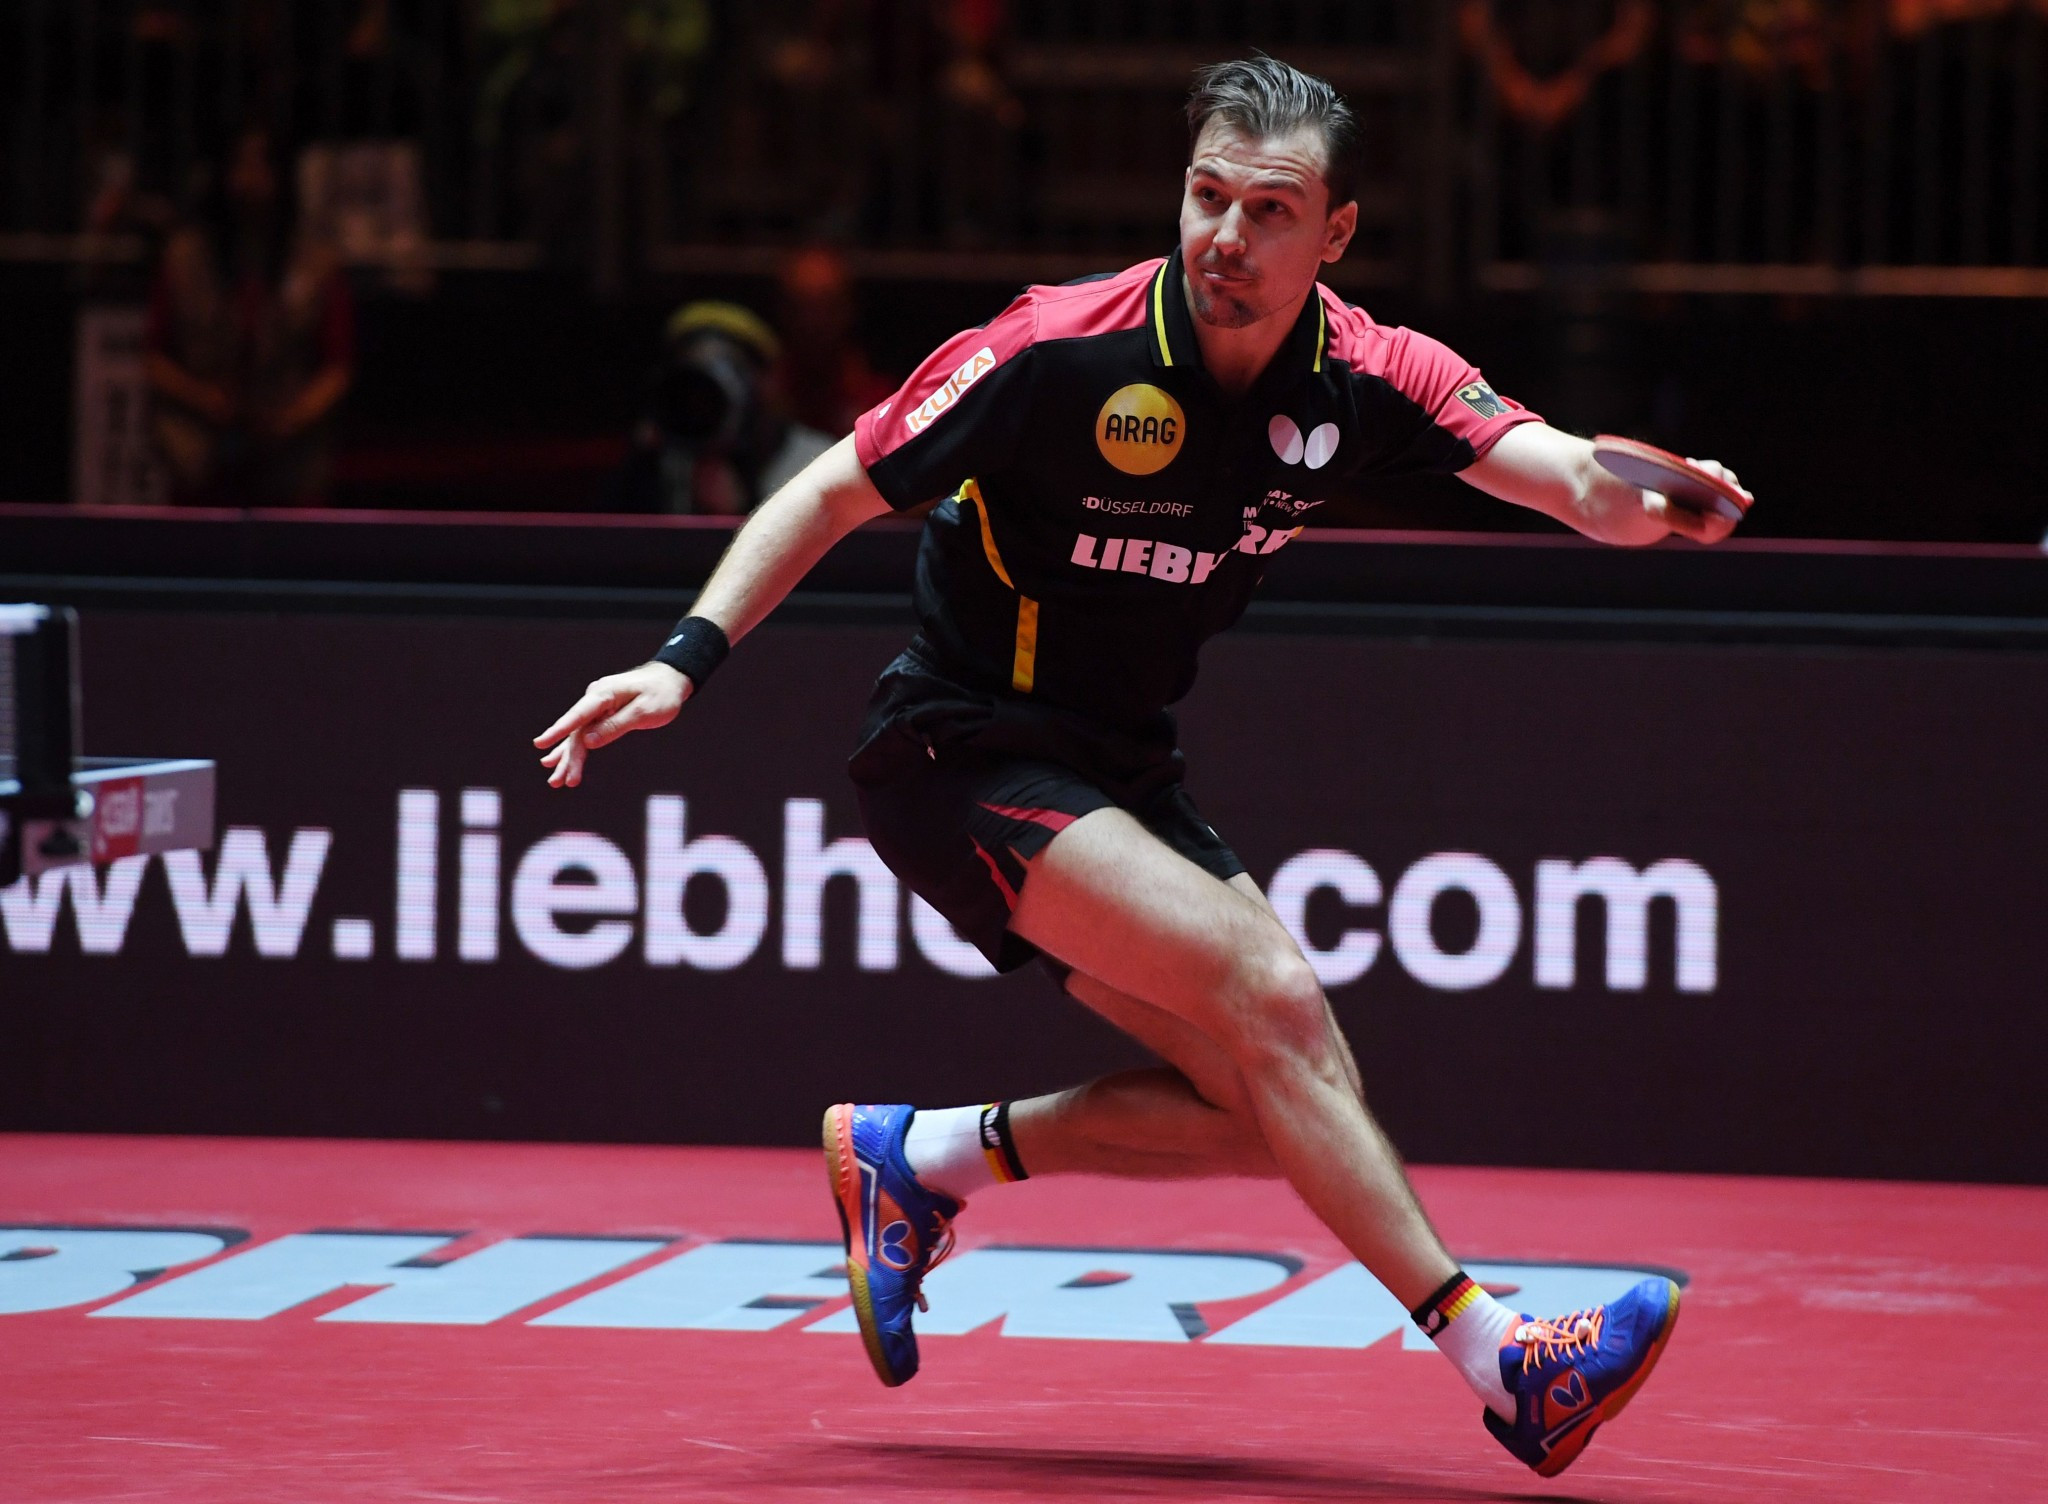 Boll comes from behind to advance at ITTF Czech Open